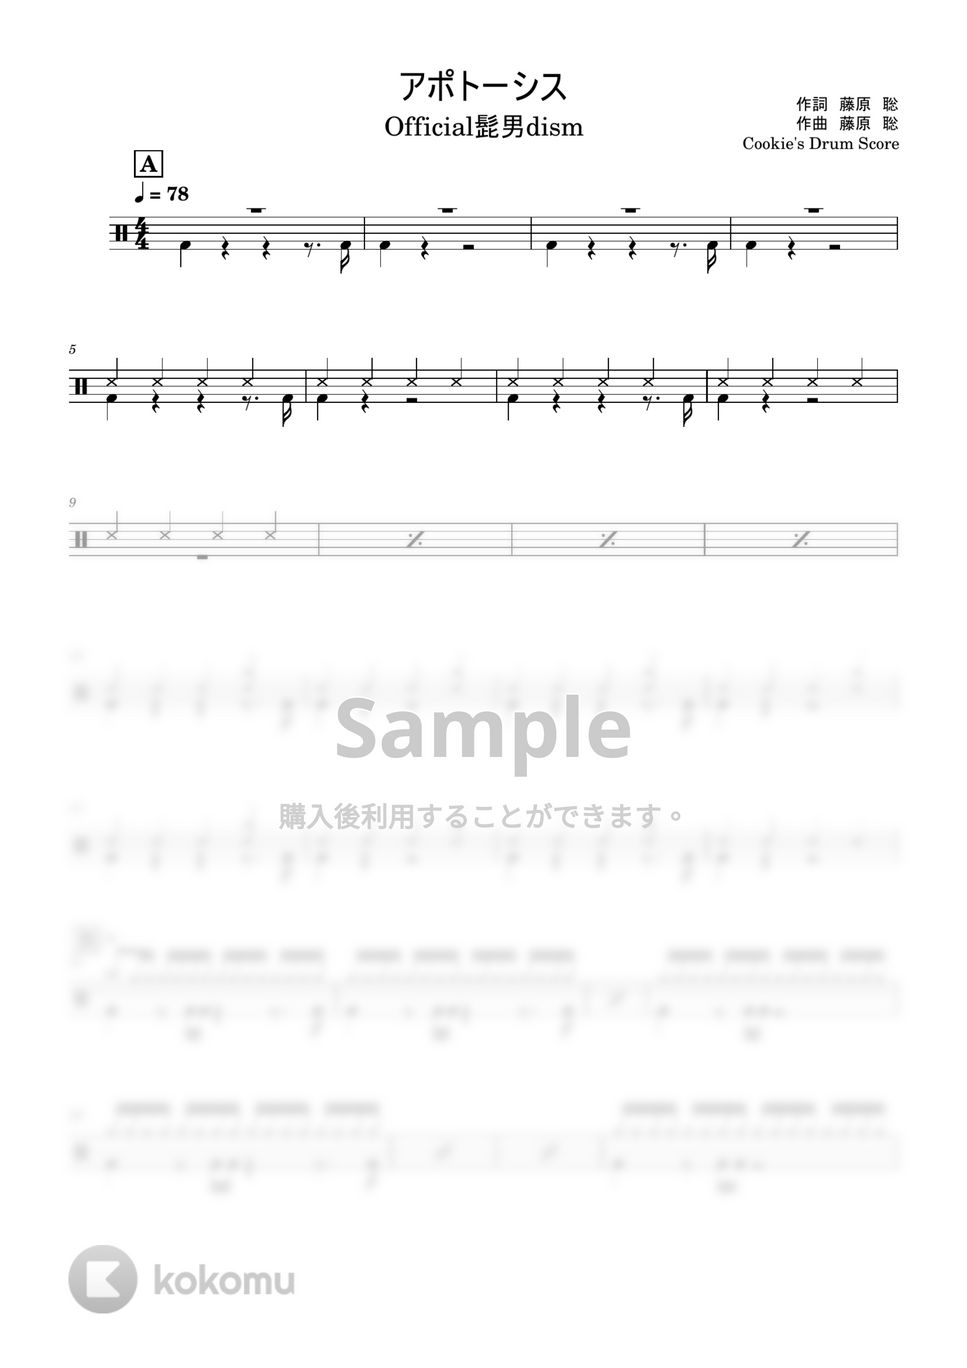 Official髭男dism - アポトーシス by Cookie's Drum Score